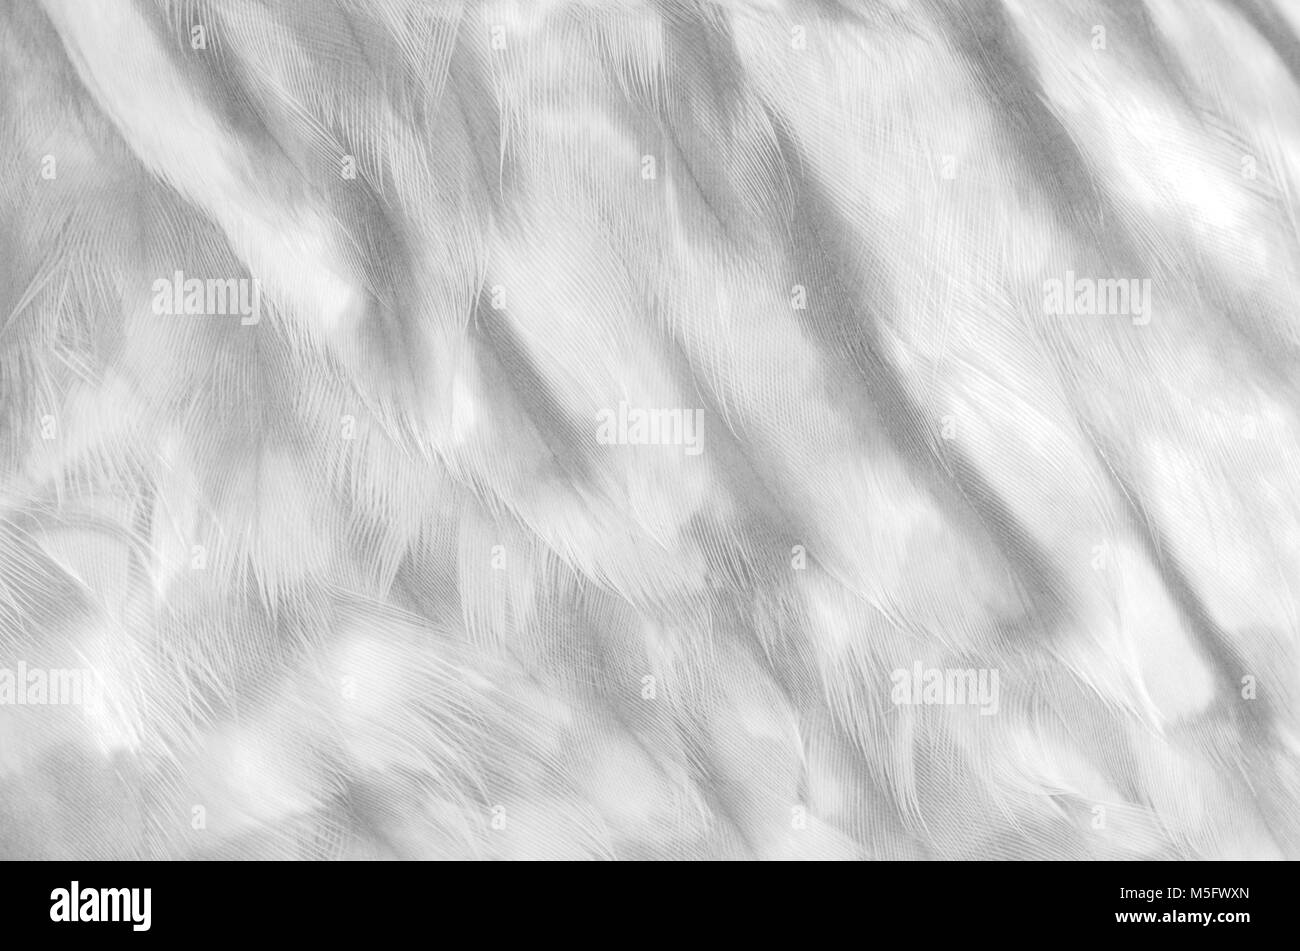 Owl feather, closeup photo of bird feather present a detail of texture and pattern of bird feather at a bird stomach, abstract background, pattern bac Stock Photo